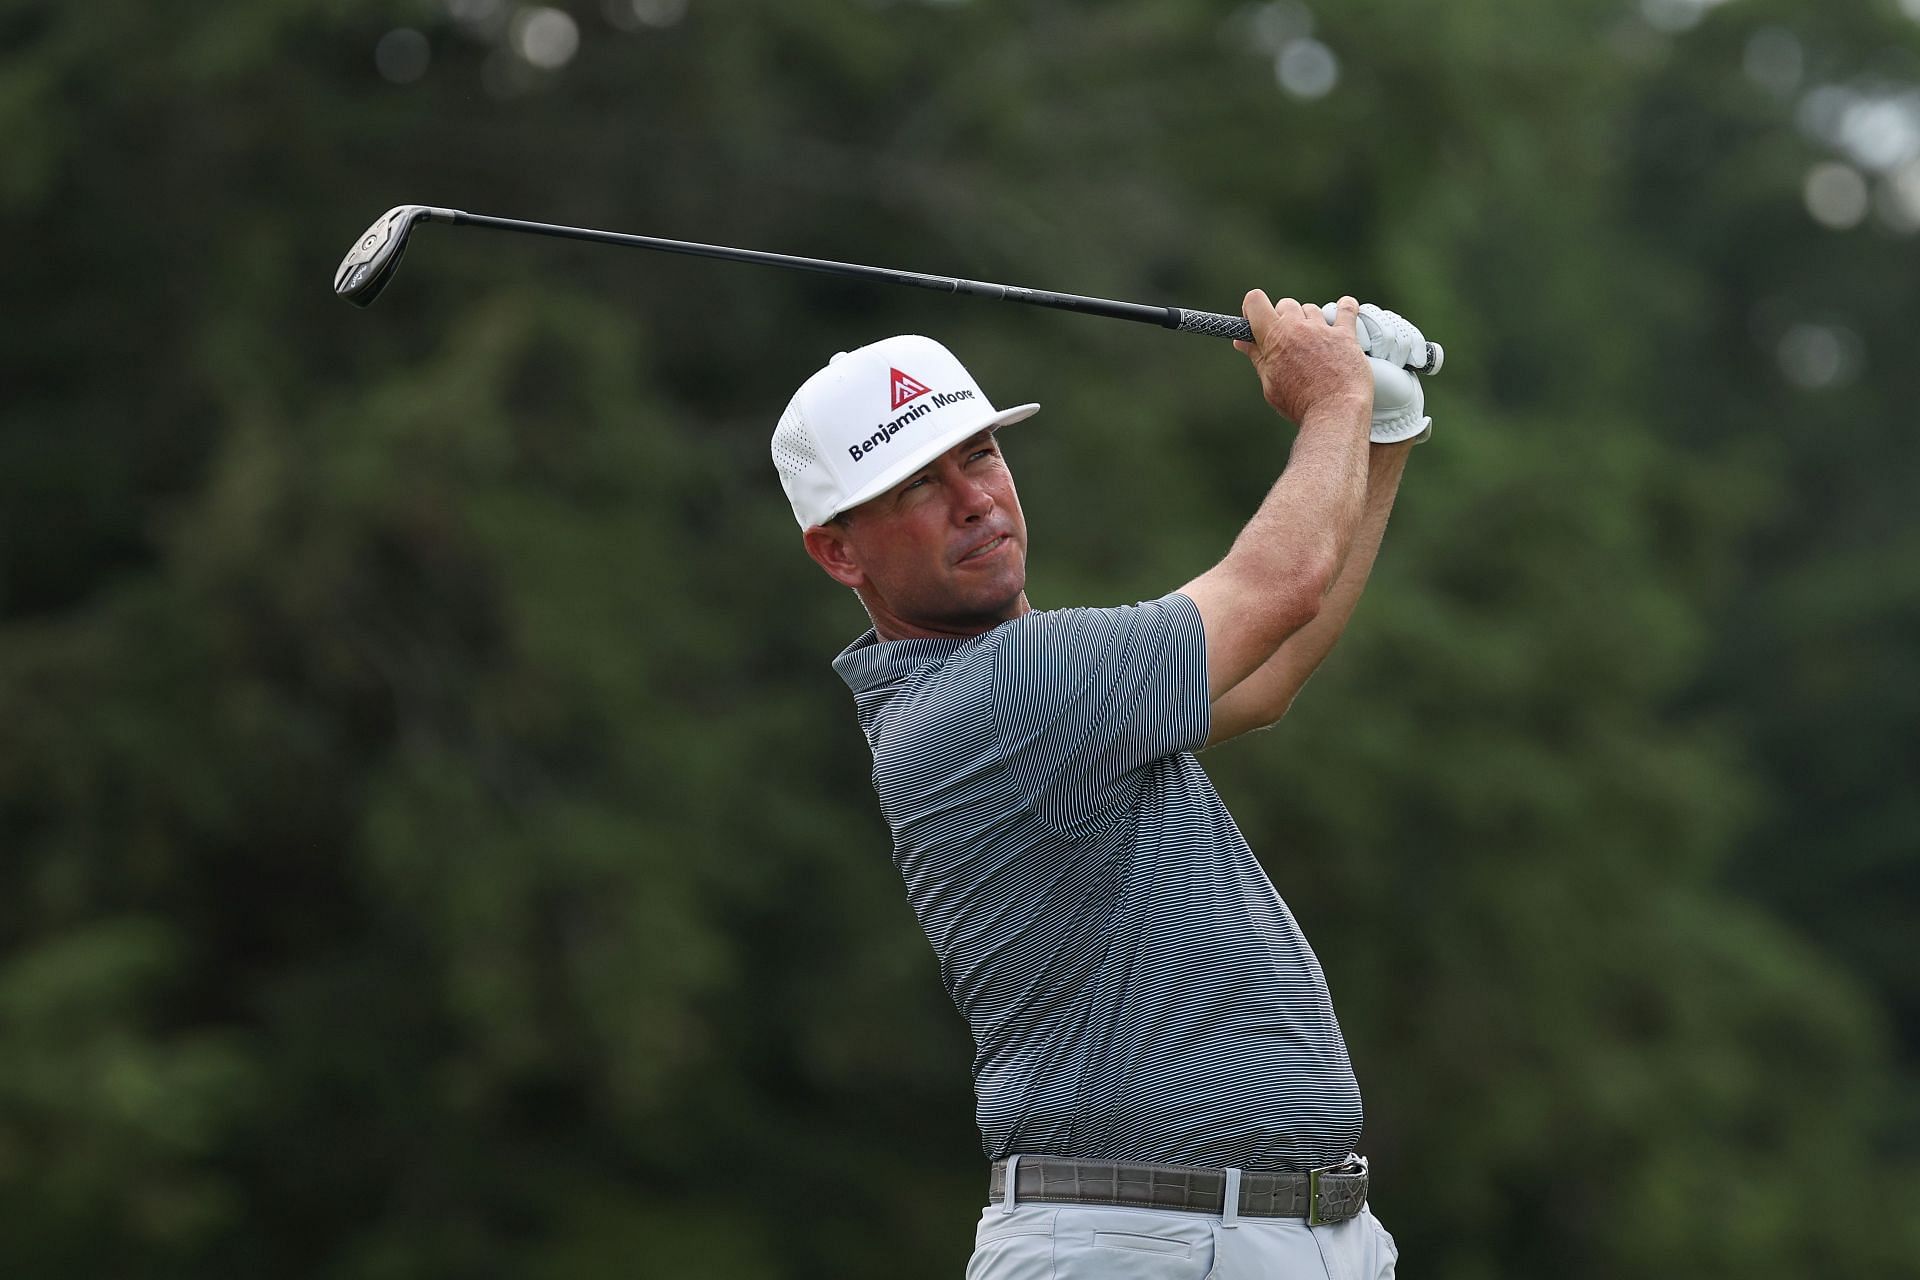 Chez Reavie at the 2023 Travelers Championship - Final Round (Image via Getty)